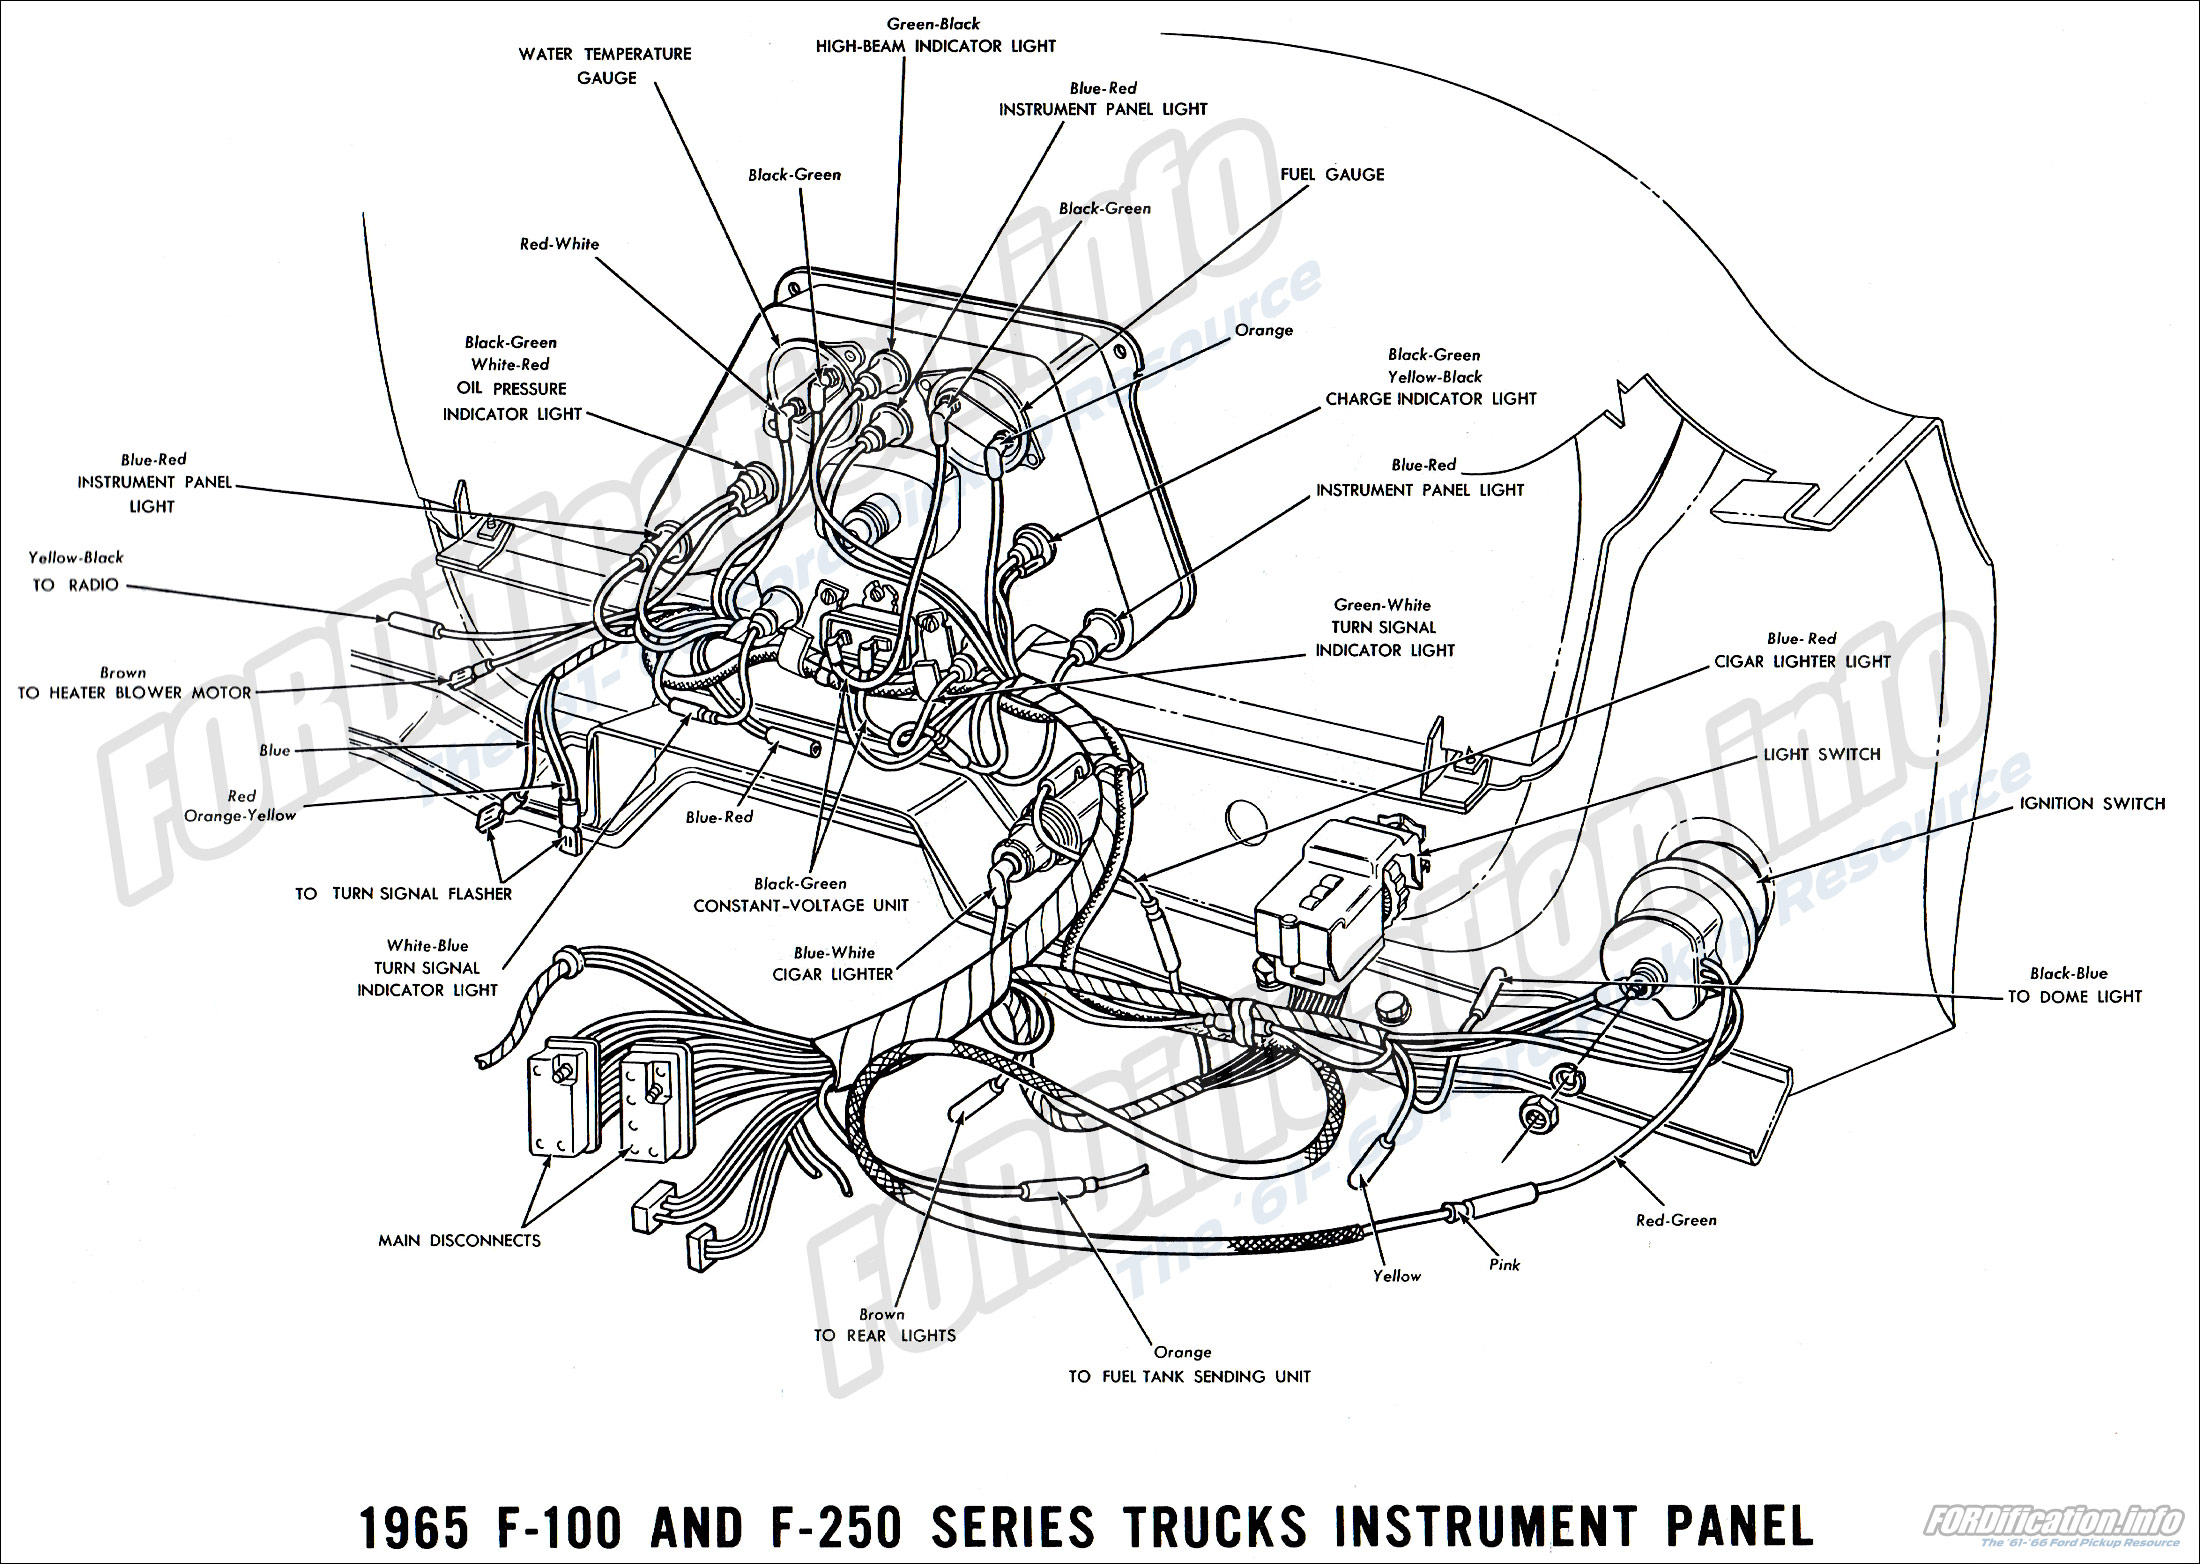 1965 Ford Truck Wiring Diagrams - FORDification.info - The ... 61 f100 wiring diagram 